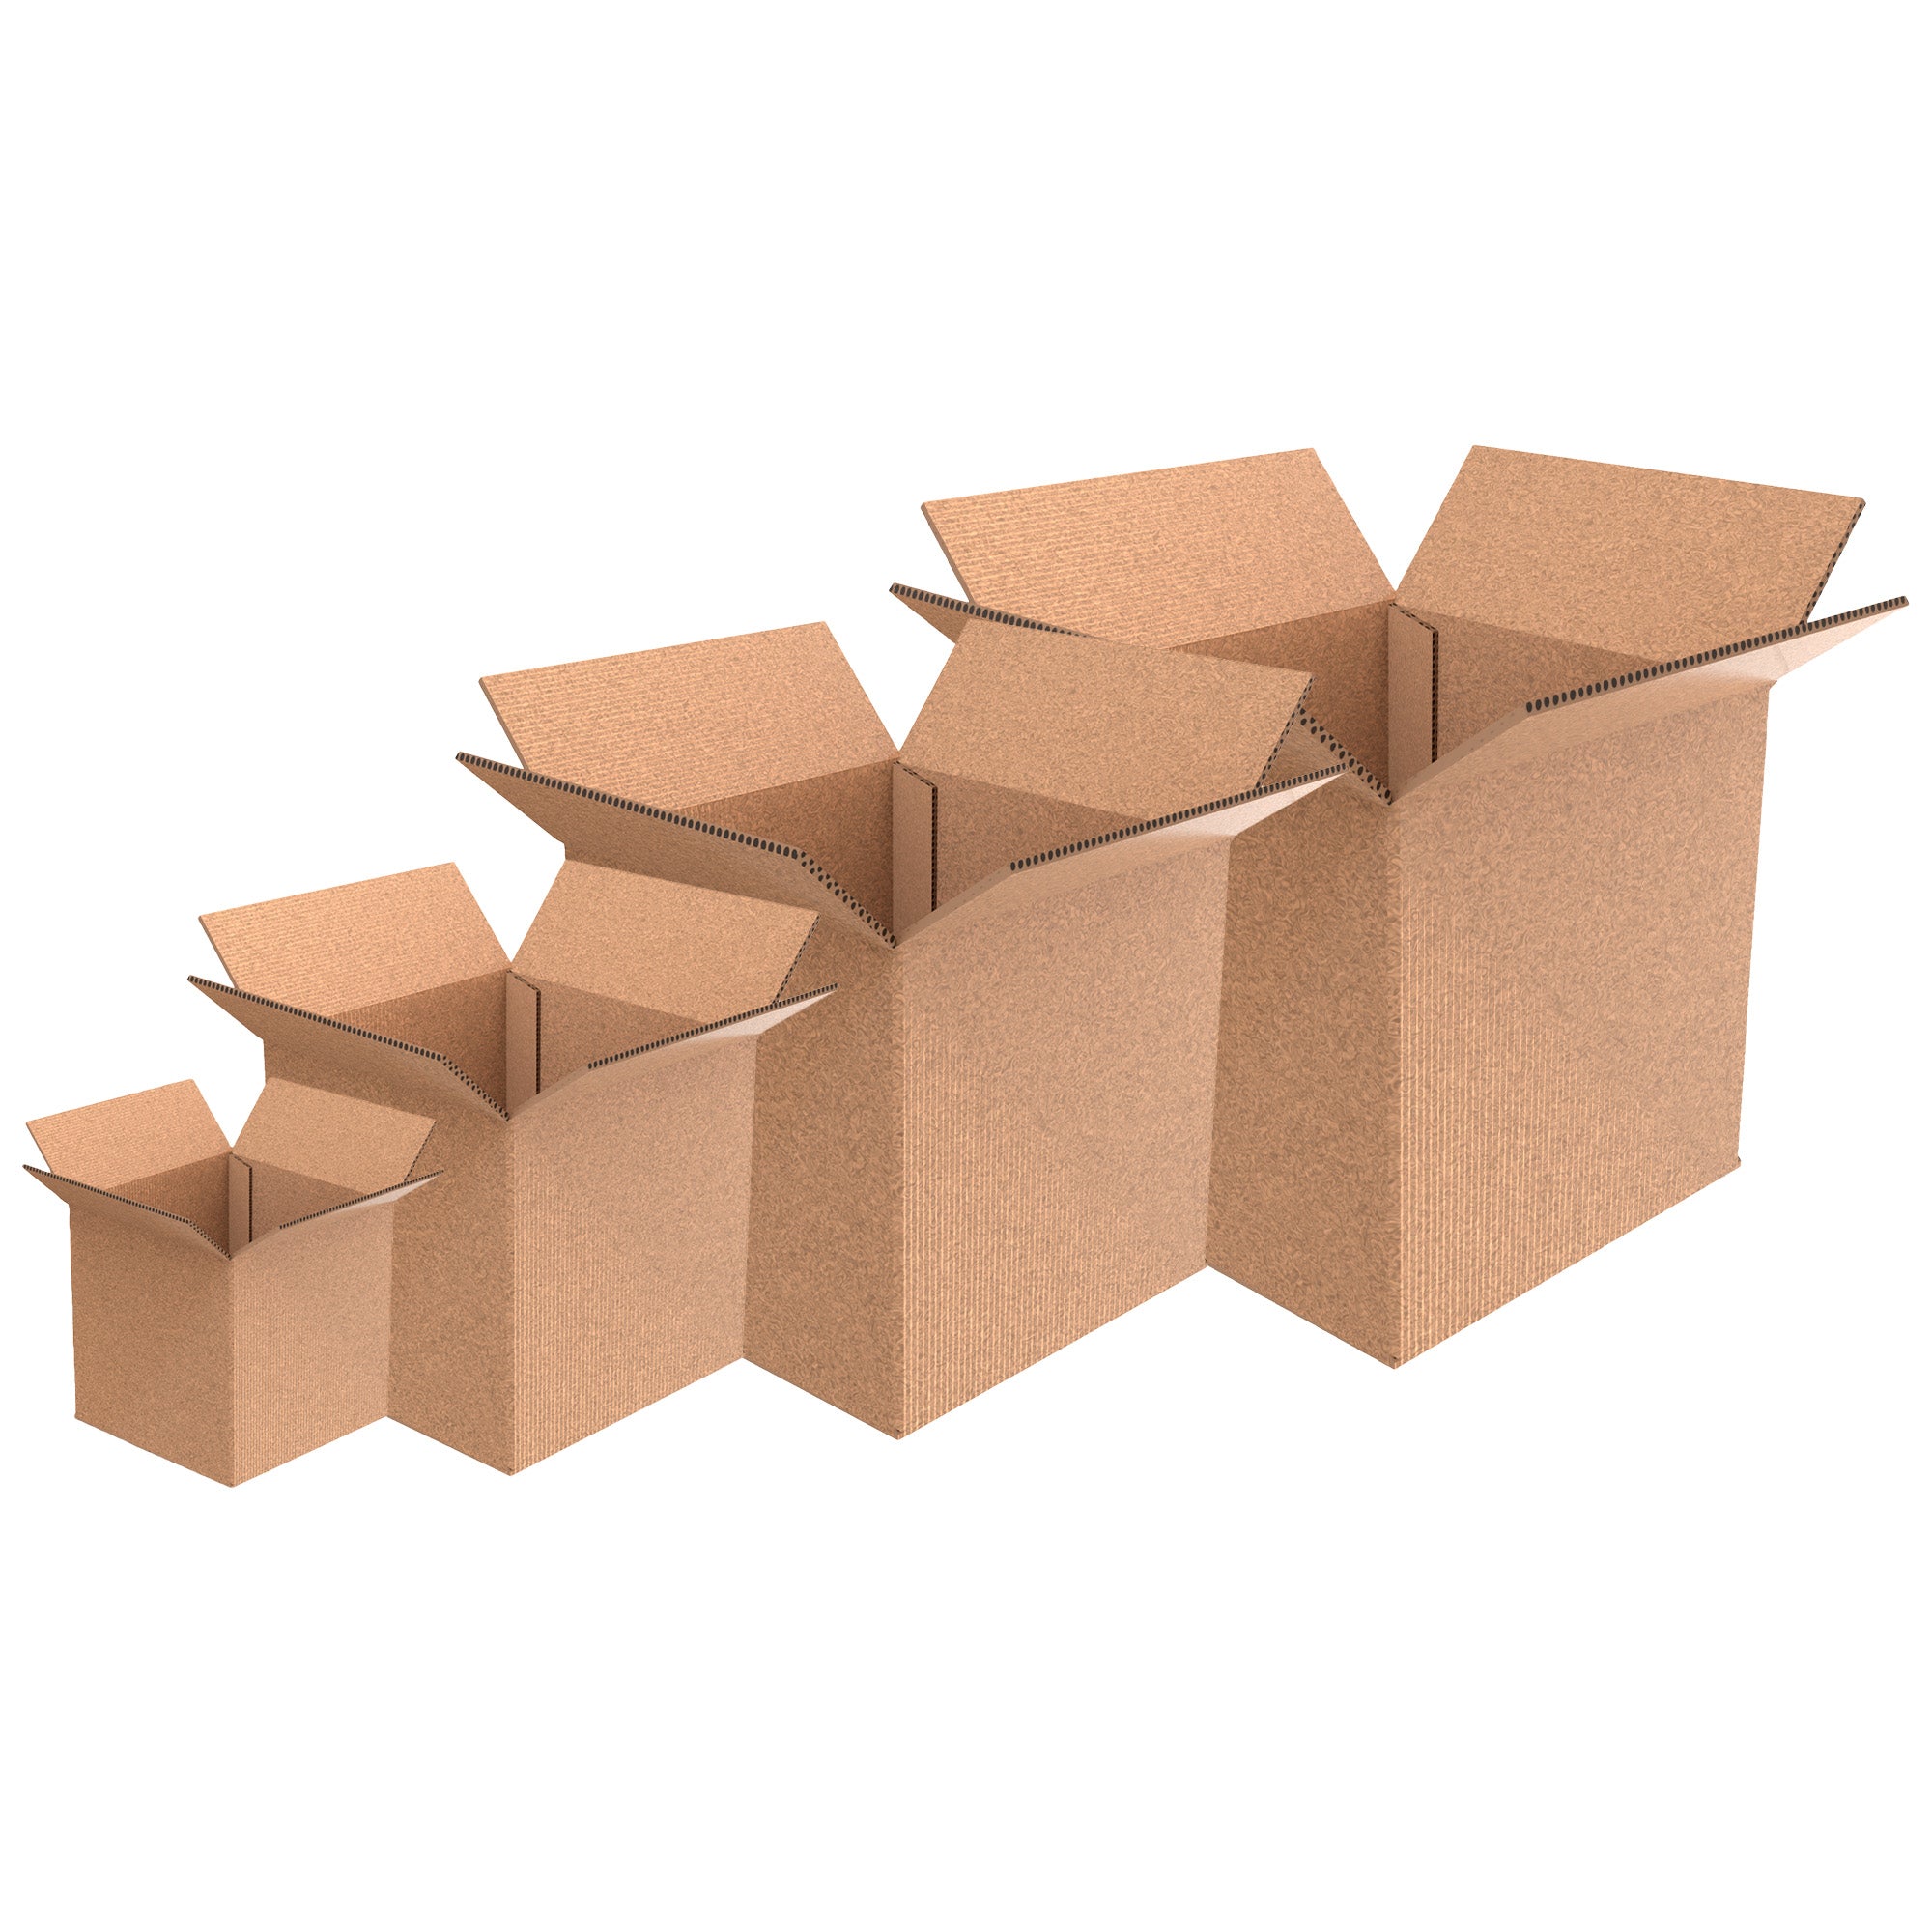 Cube Boxes / Square Shipping Boxes